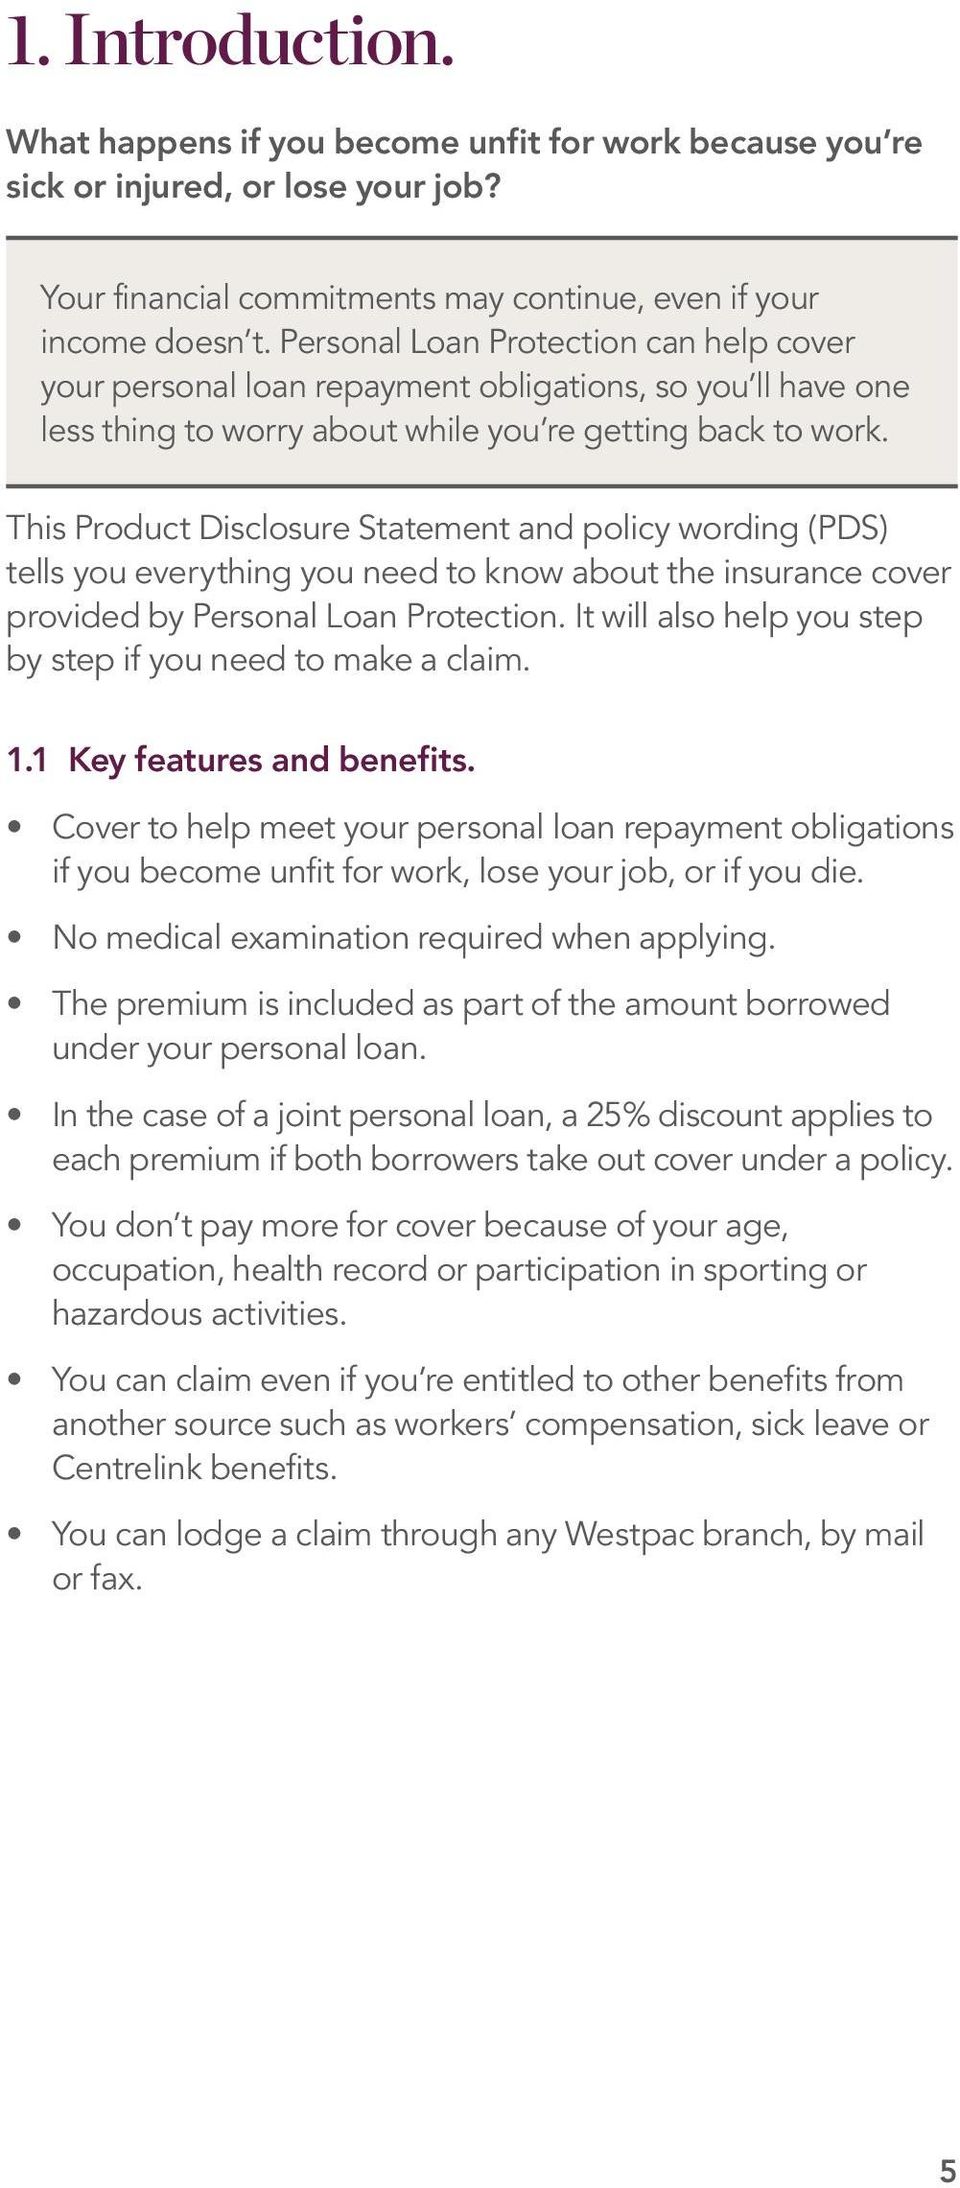 This Product Disclosure Statement and policy wording (PDS) tells you everything you need to know about the insurance cover provided by Personal Loan Protection.